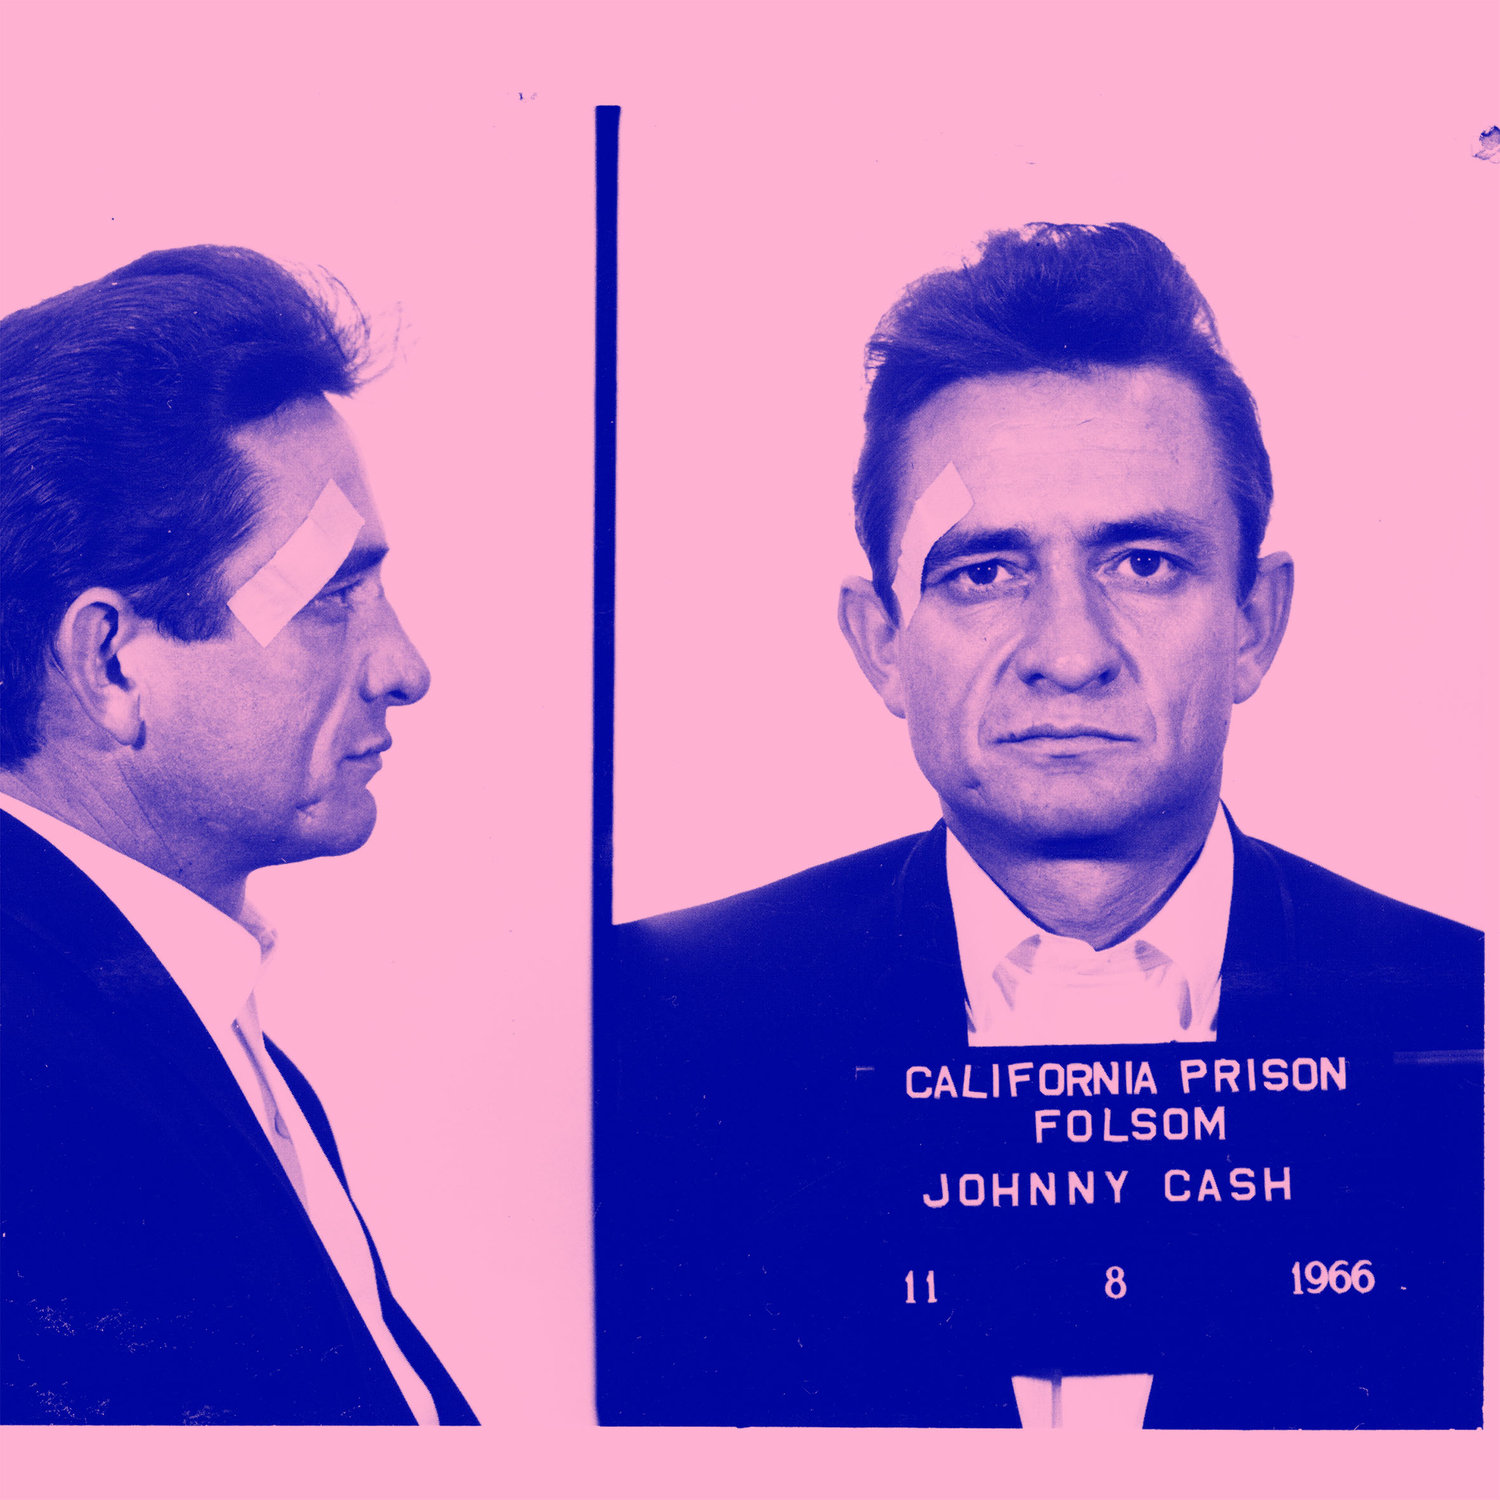 Louis Sidoli: Johnny Cash 1966 (Full Polaroid pink, navy) – Snap Galleries Limited